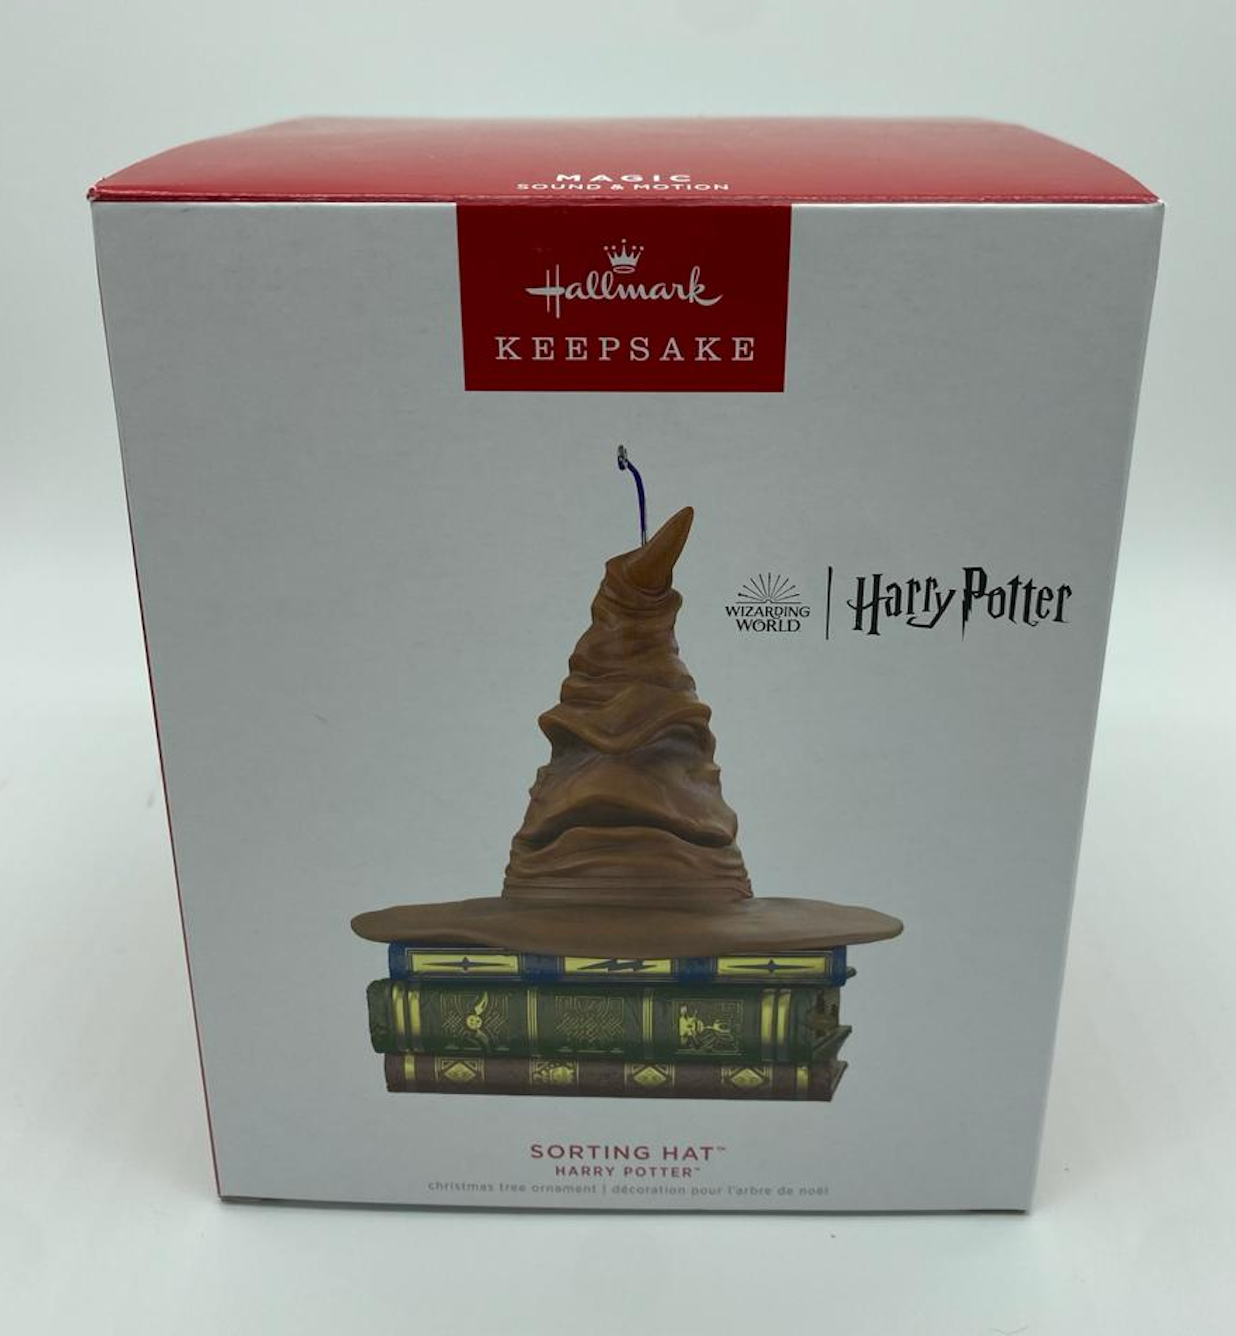 Hallmark 2022 Harry Potter Sorting Hat Ornament With Sound and Motion New